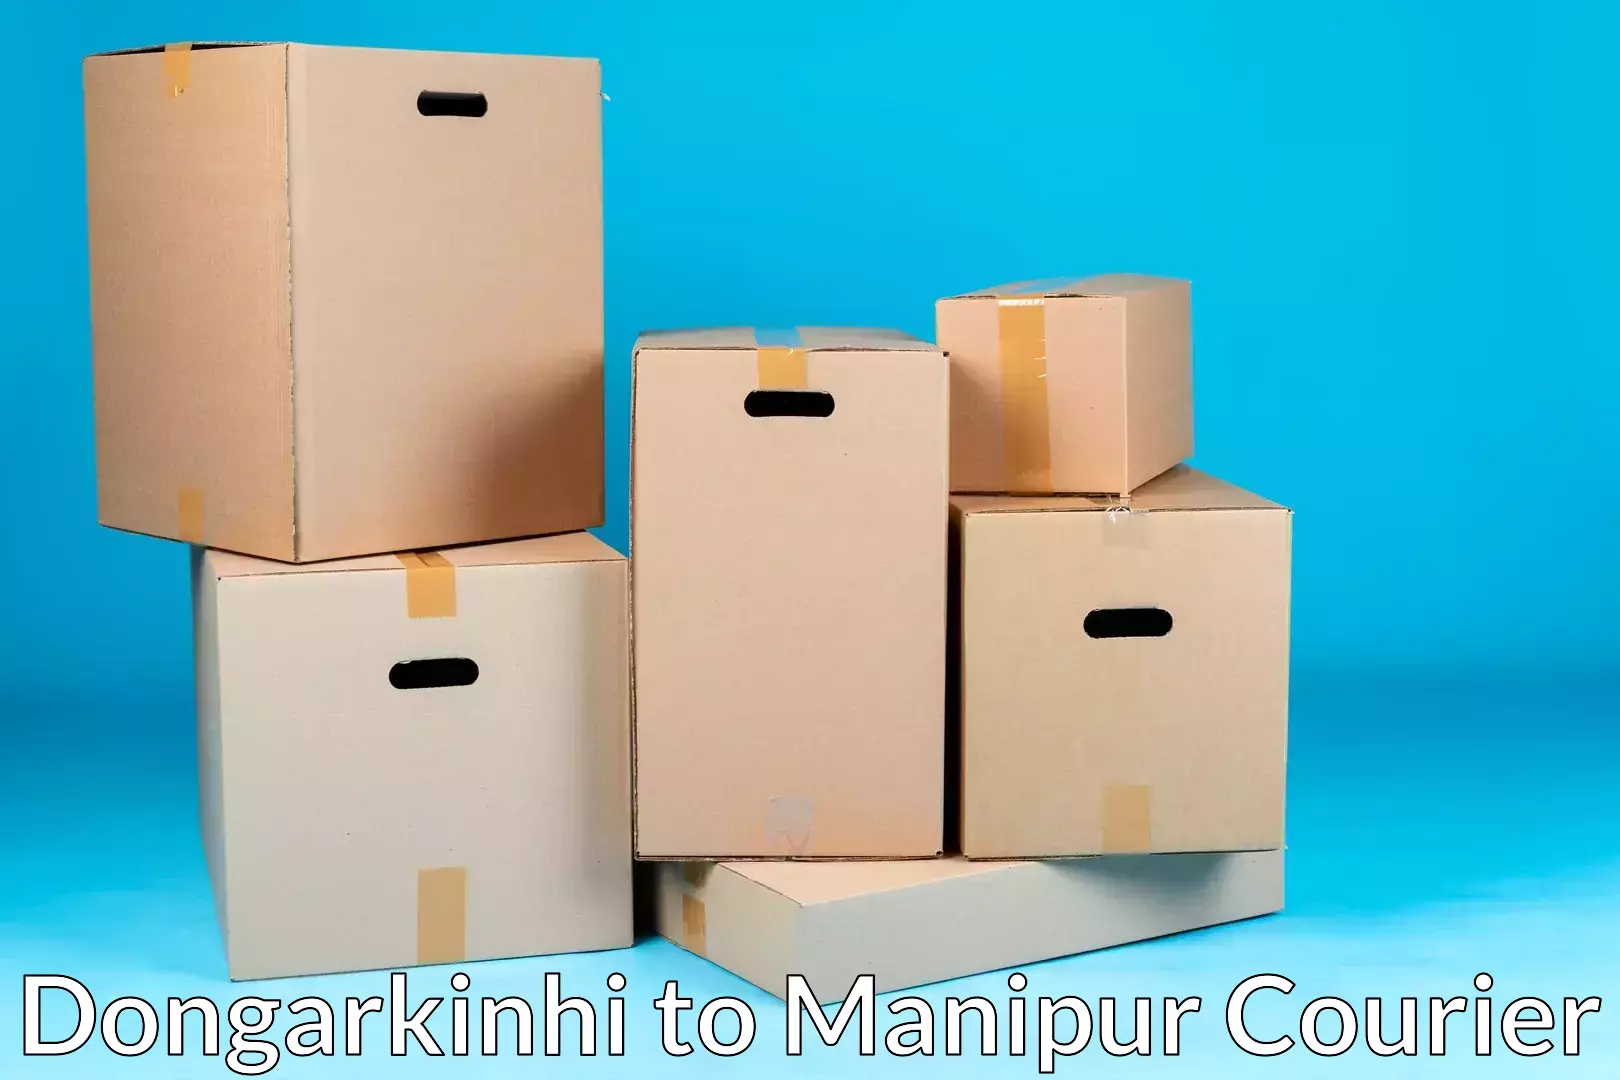 Cost-effective furniture movers Dongarkinhi to Kakching